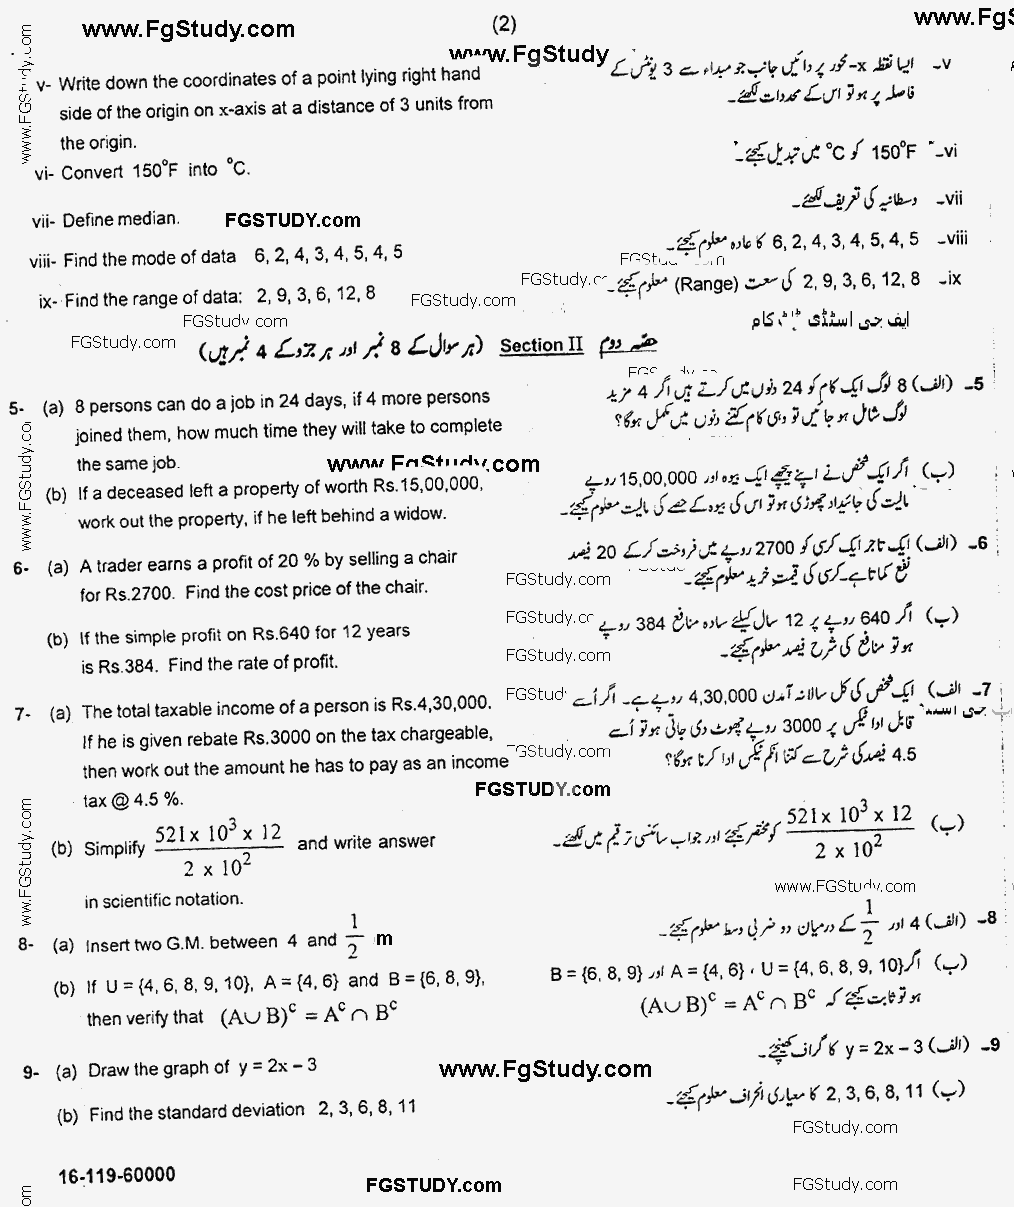 General Mathematics Subjective Group 2 9th Class Past Papers 2019